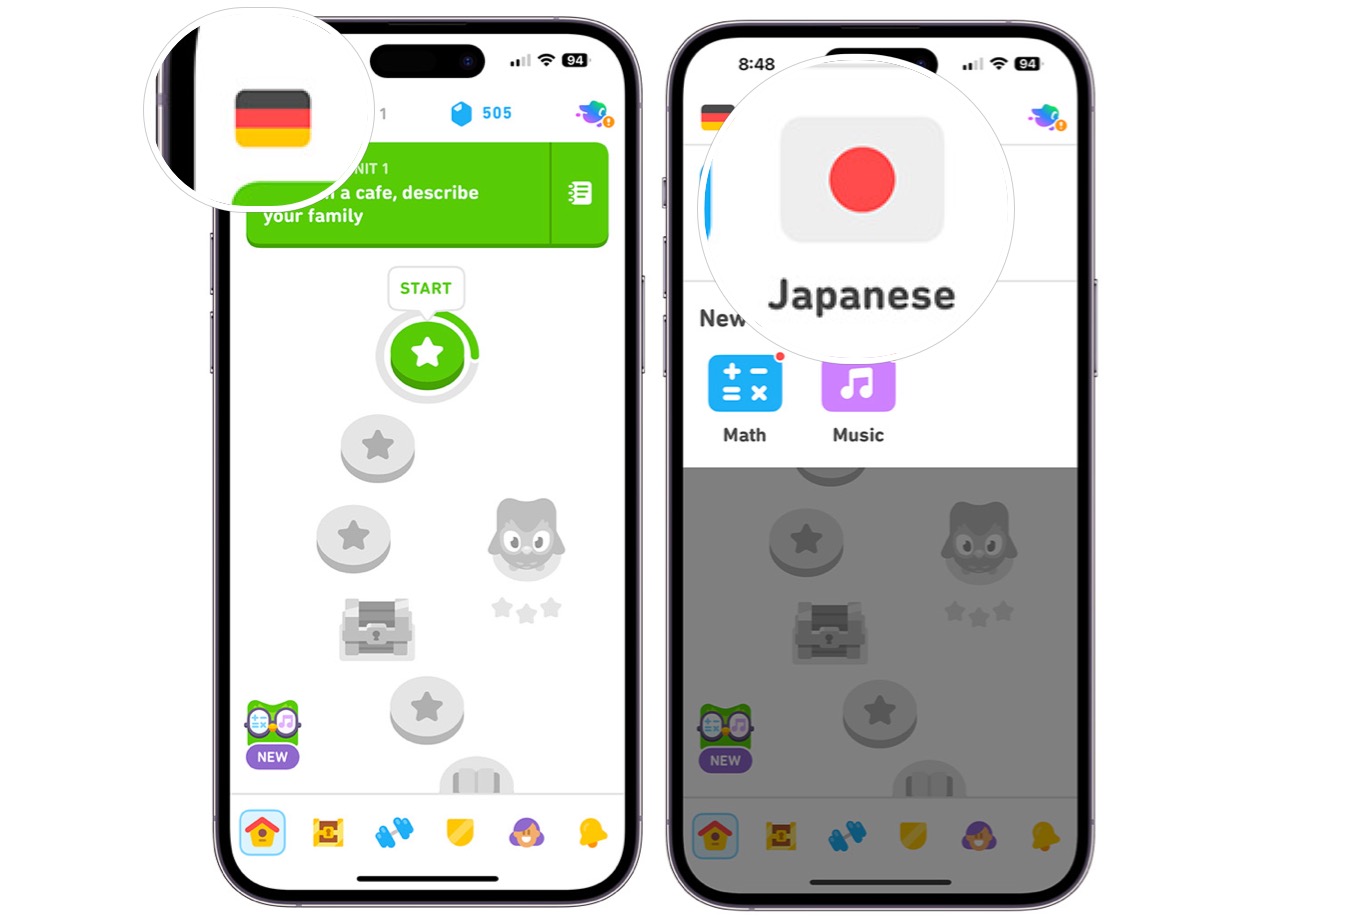 A screenshot that shows the steps required to switch languages in the Duolingo app.